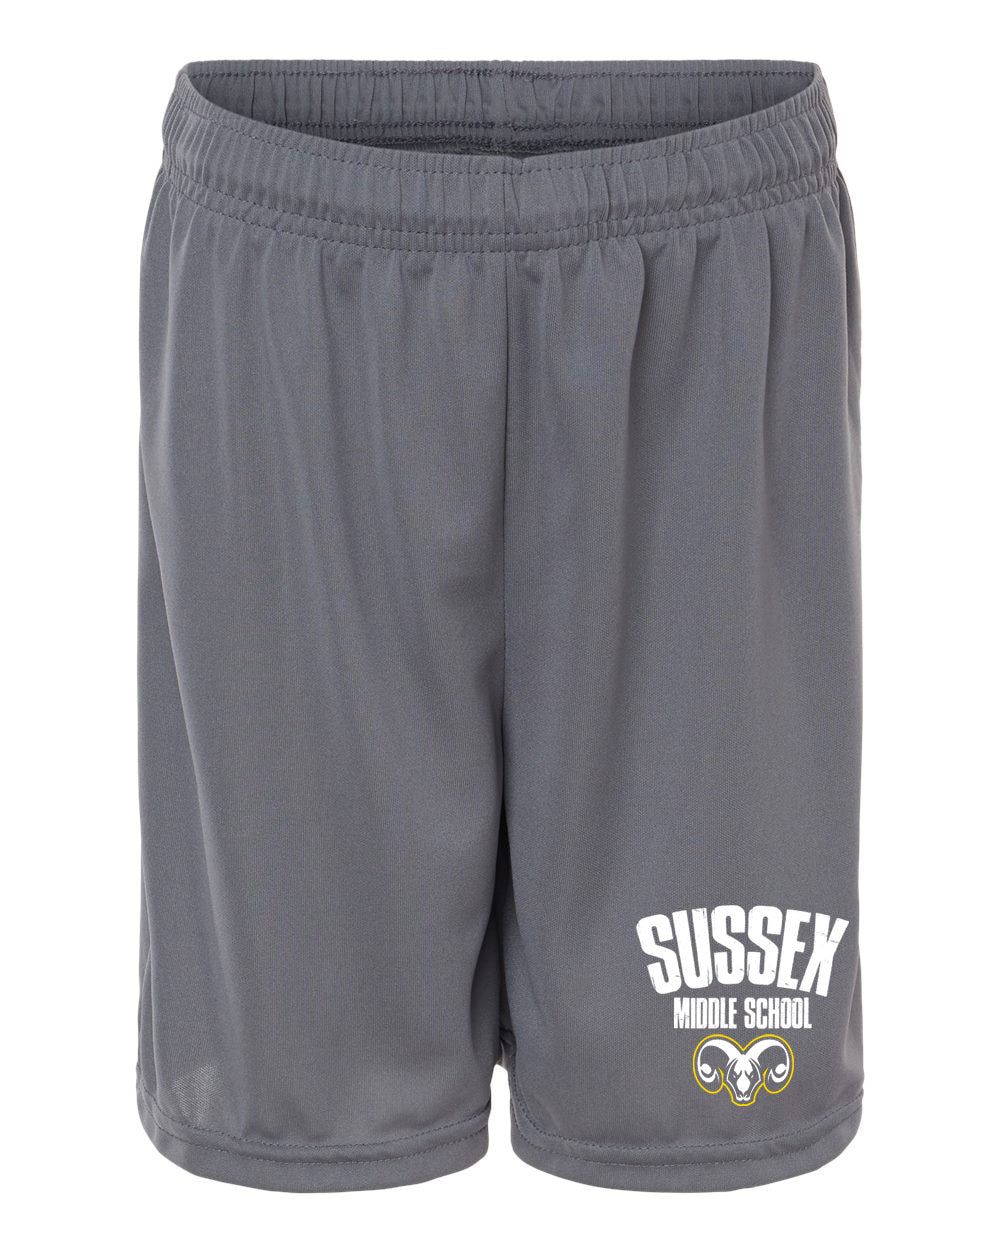 Sussex Middle Design 4 Performance Shorts